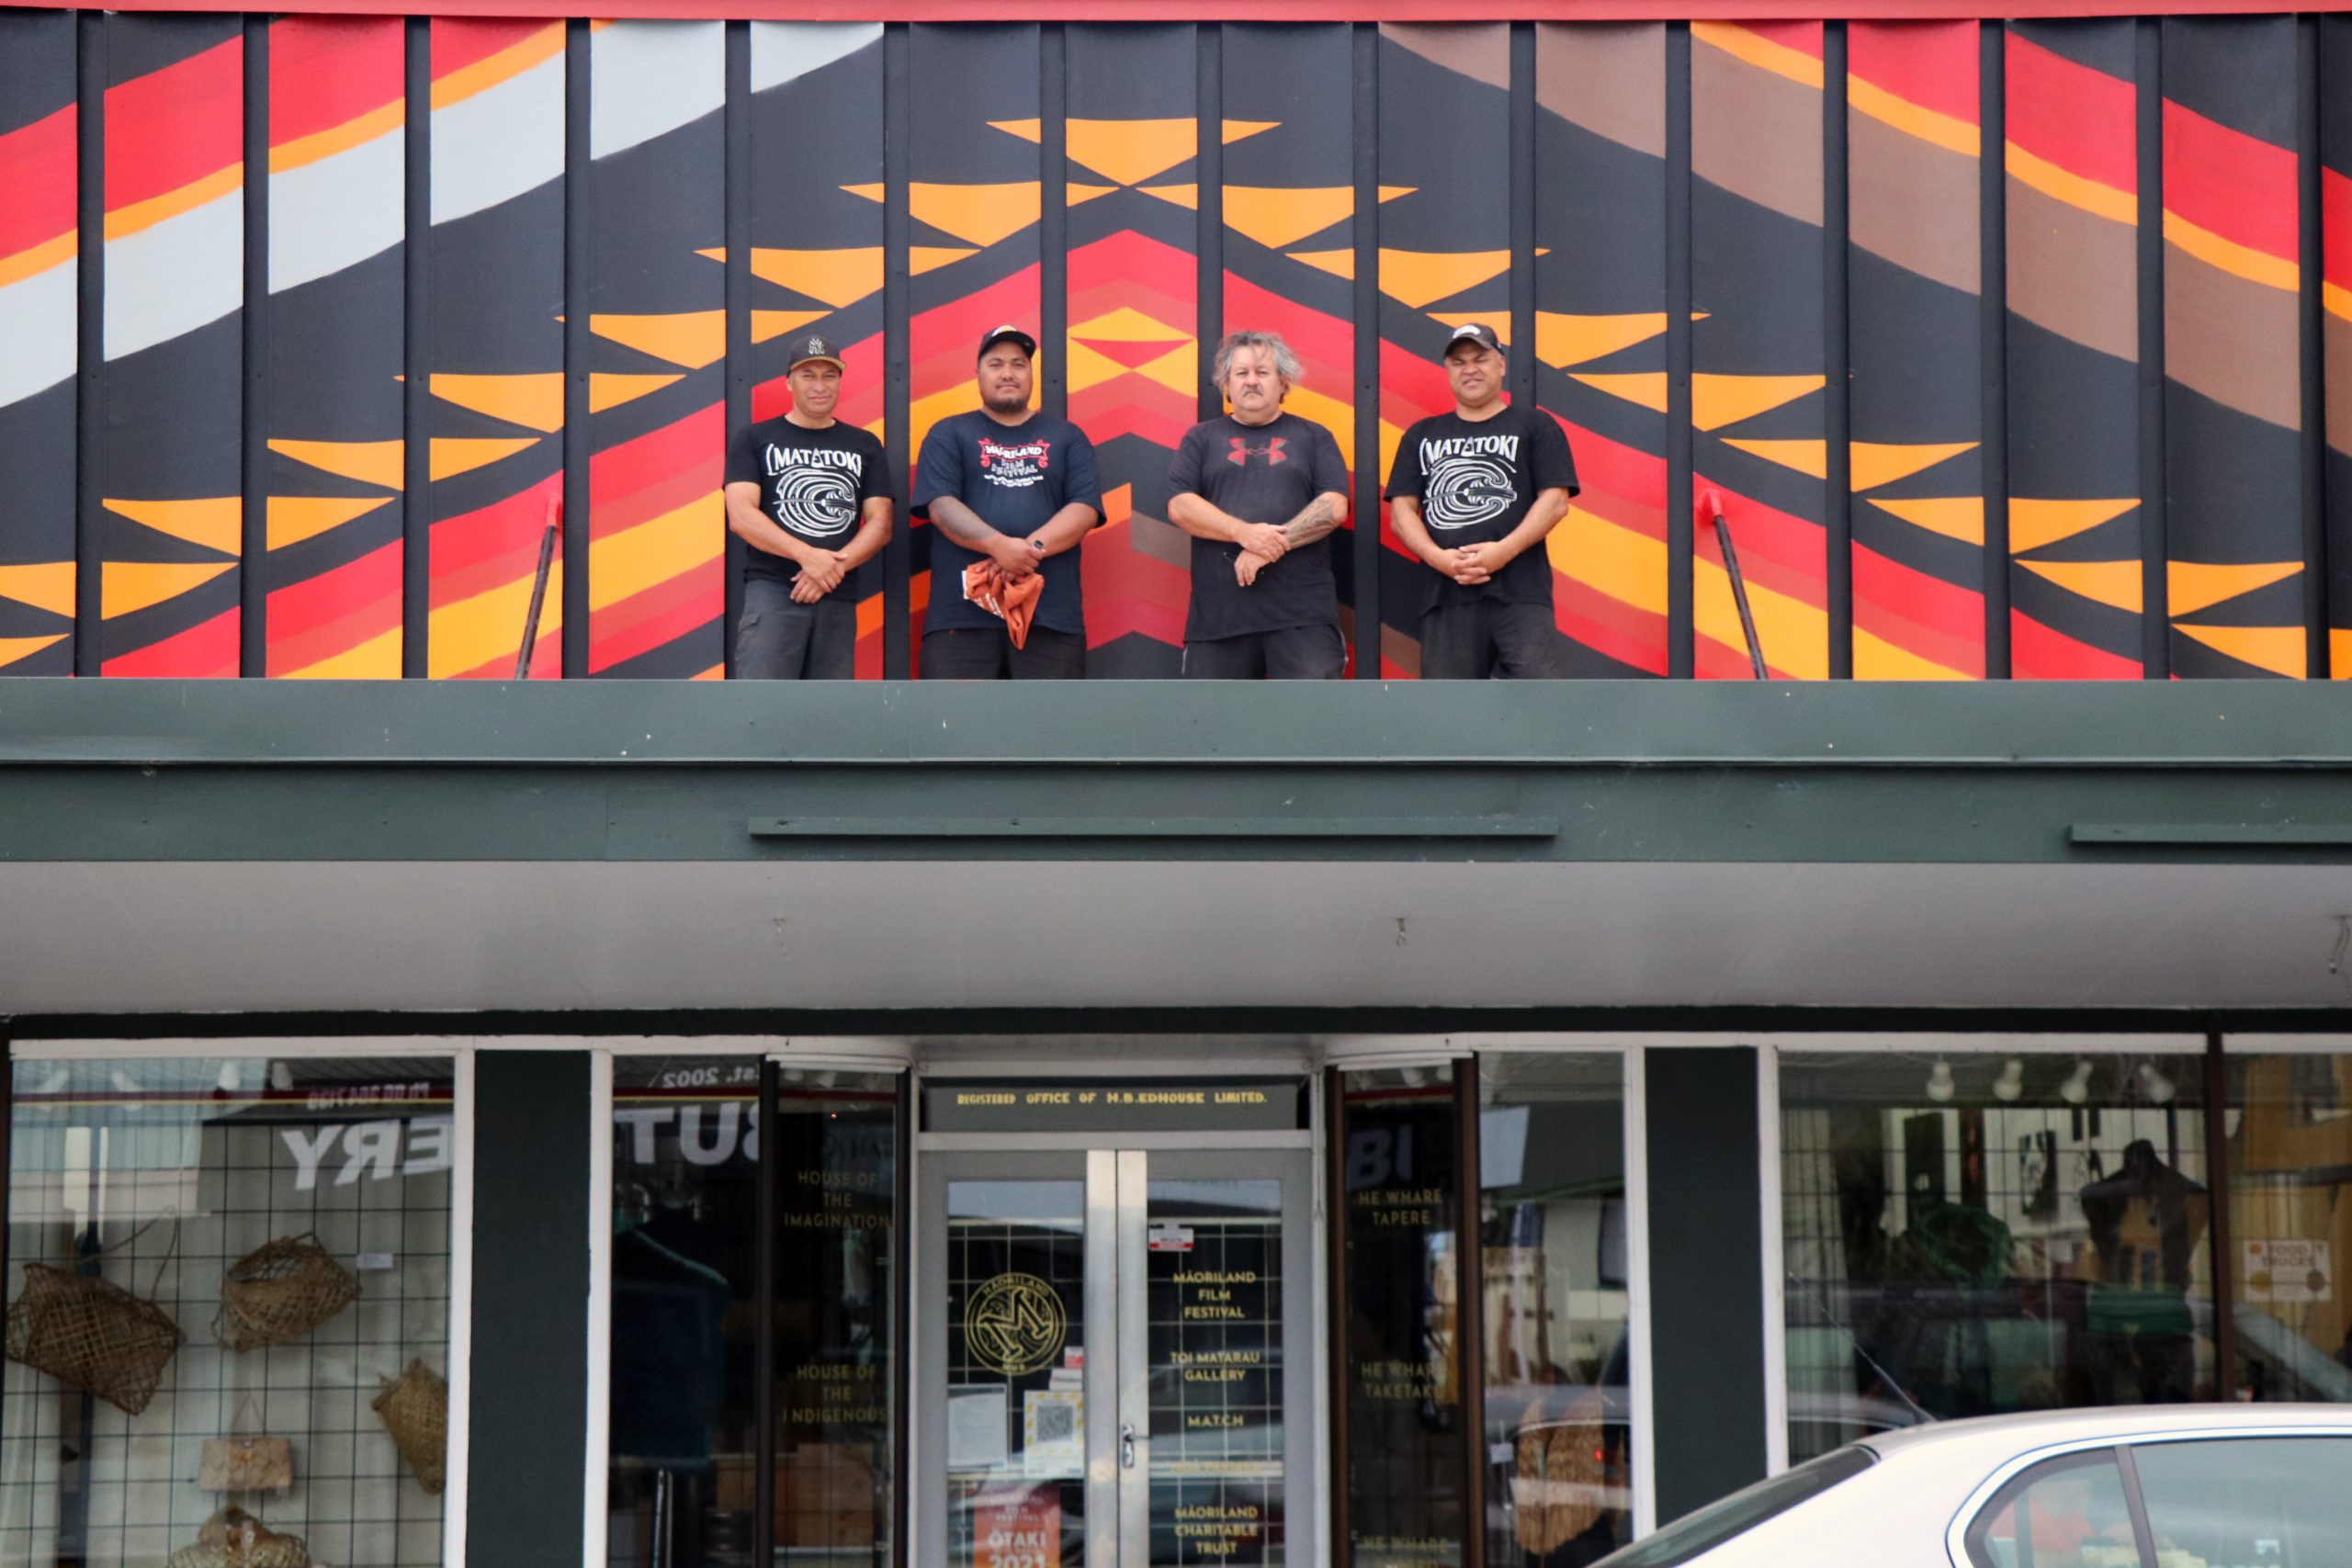 Renowned Te Matatoki Carvers accept 2022/23 Artists in Residence at the Māoriland Hub